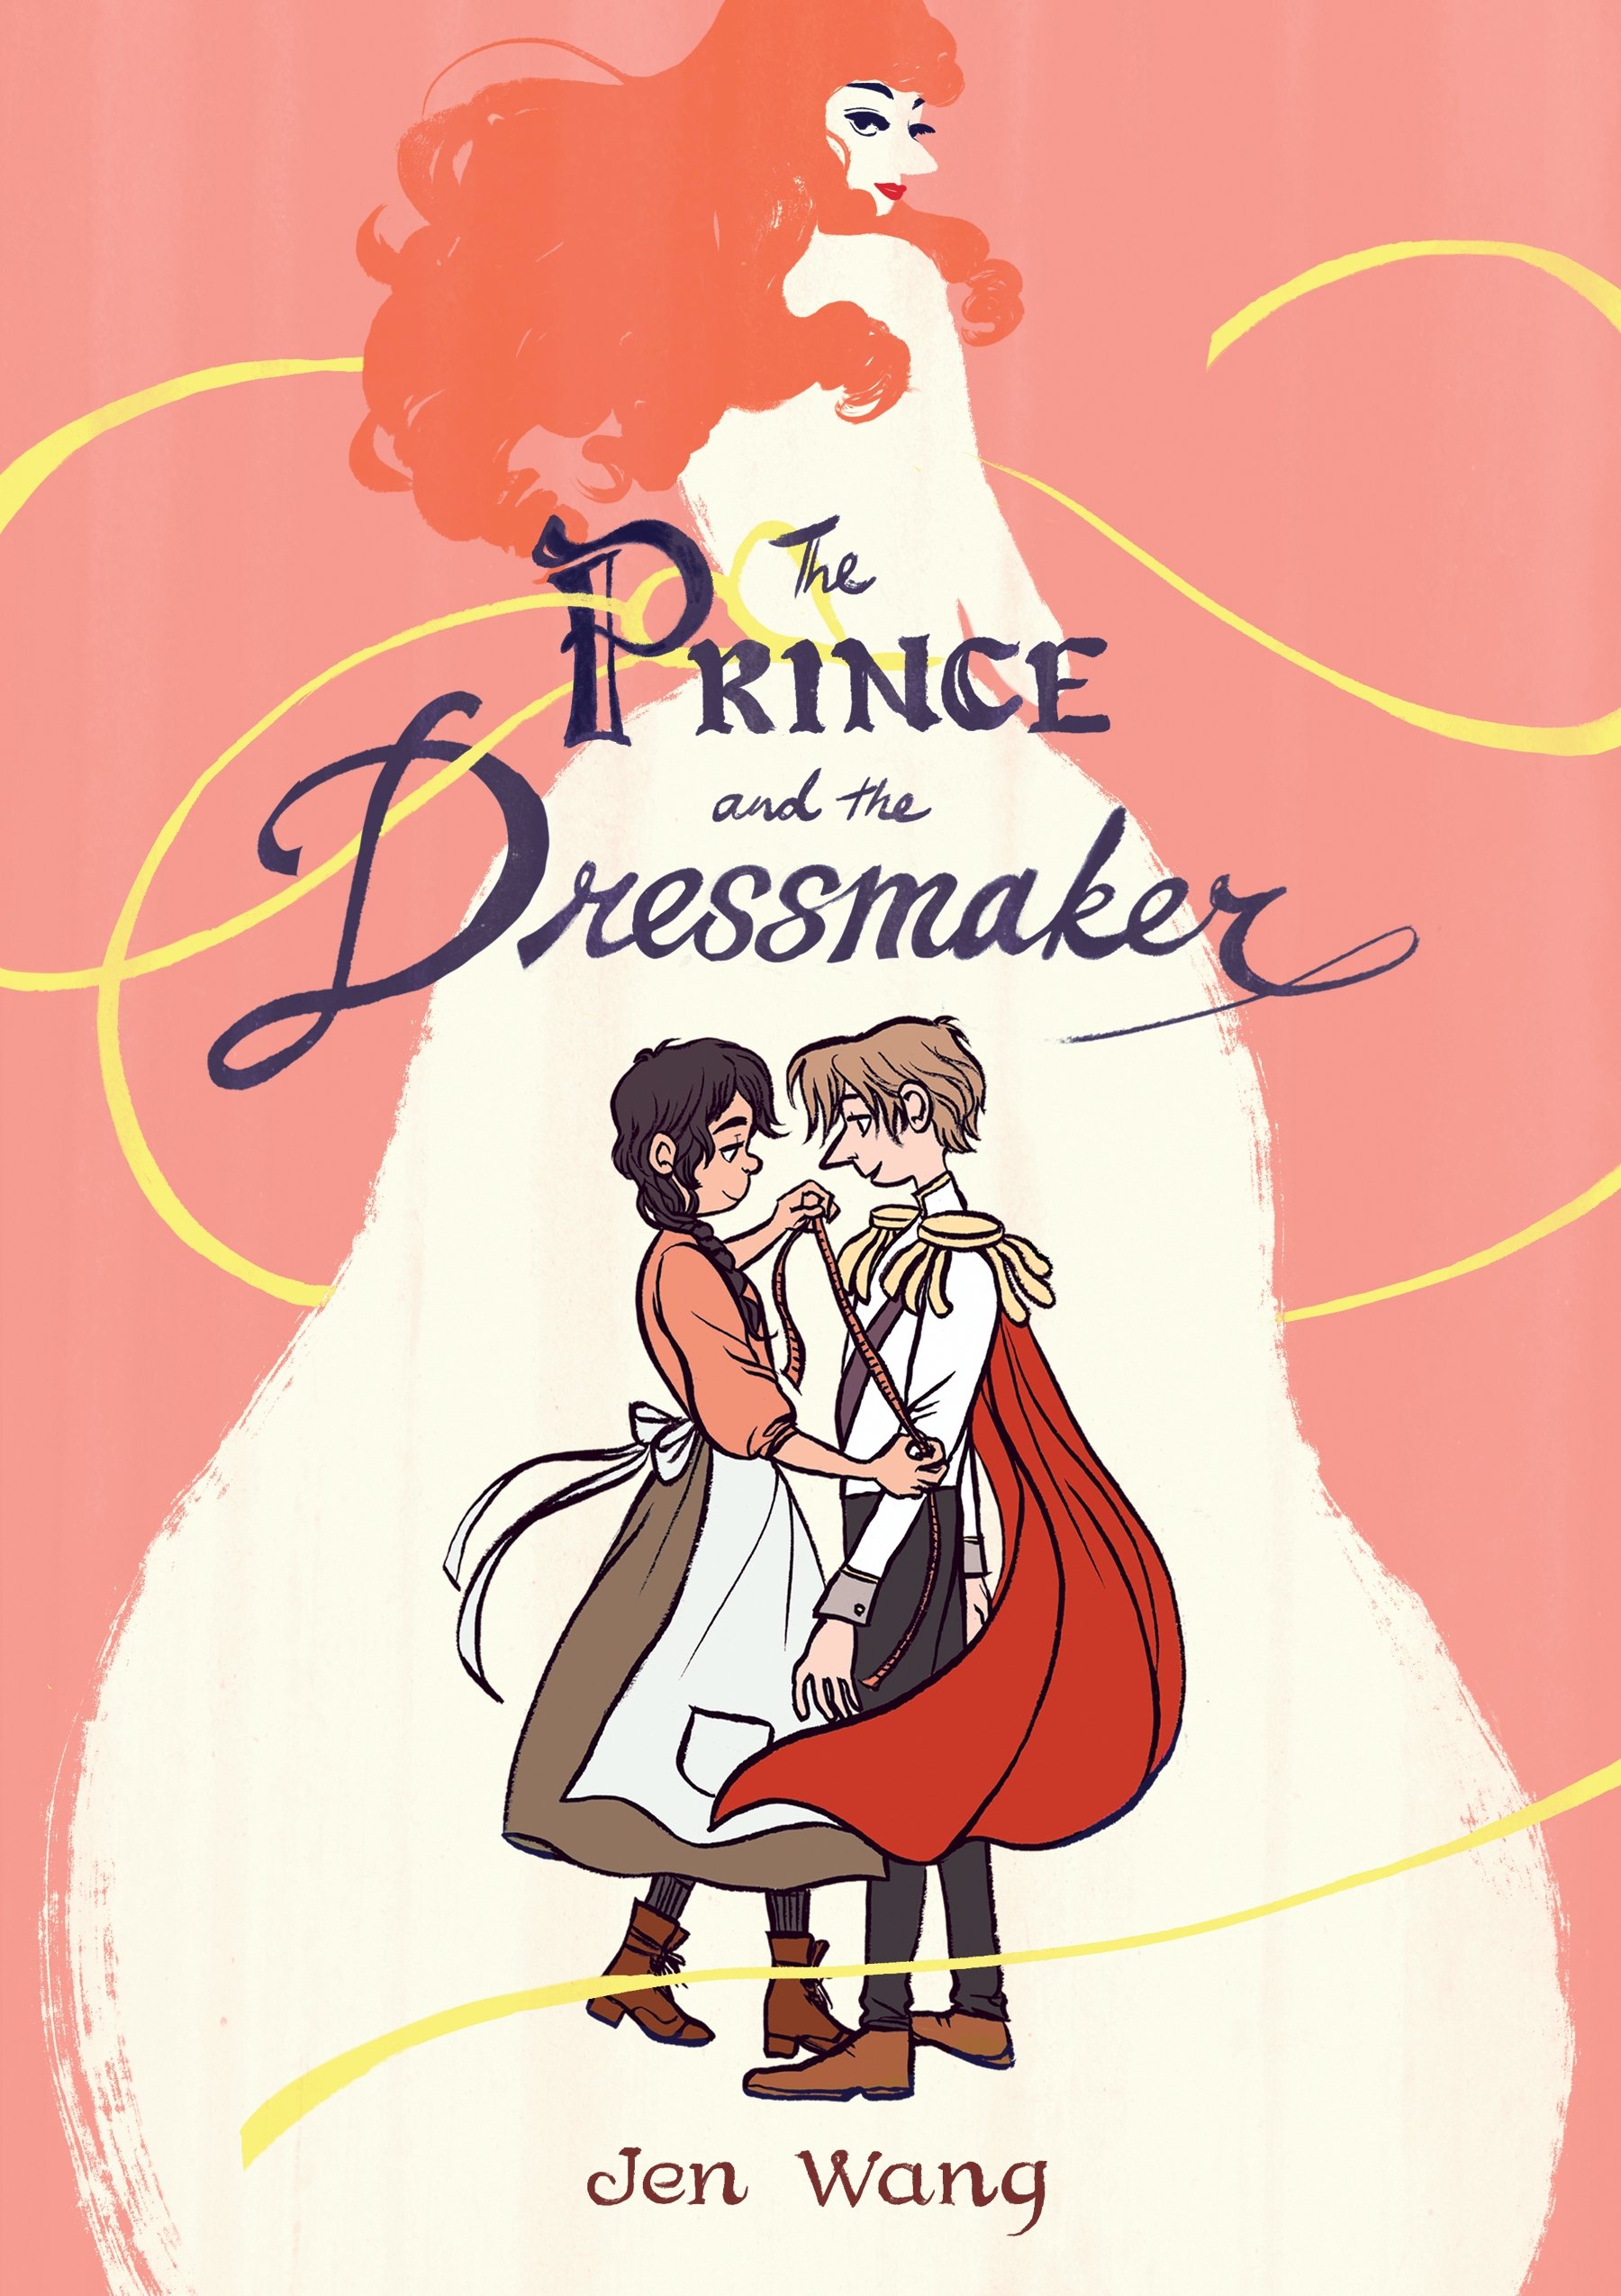 Image for "The Prince and the Dressmaker"